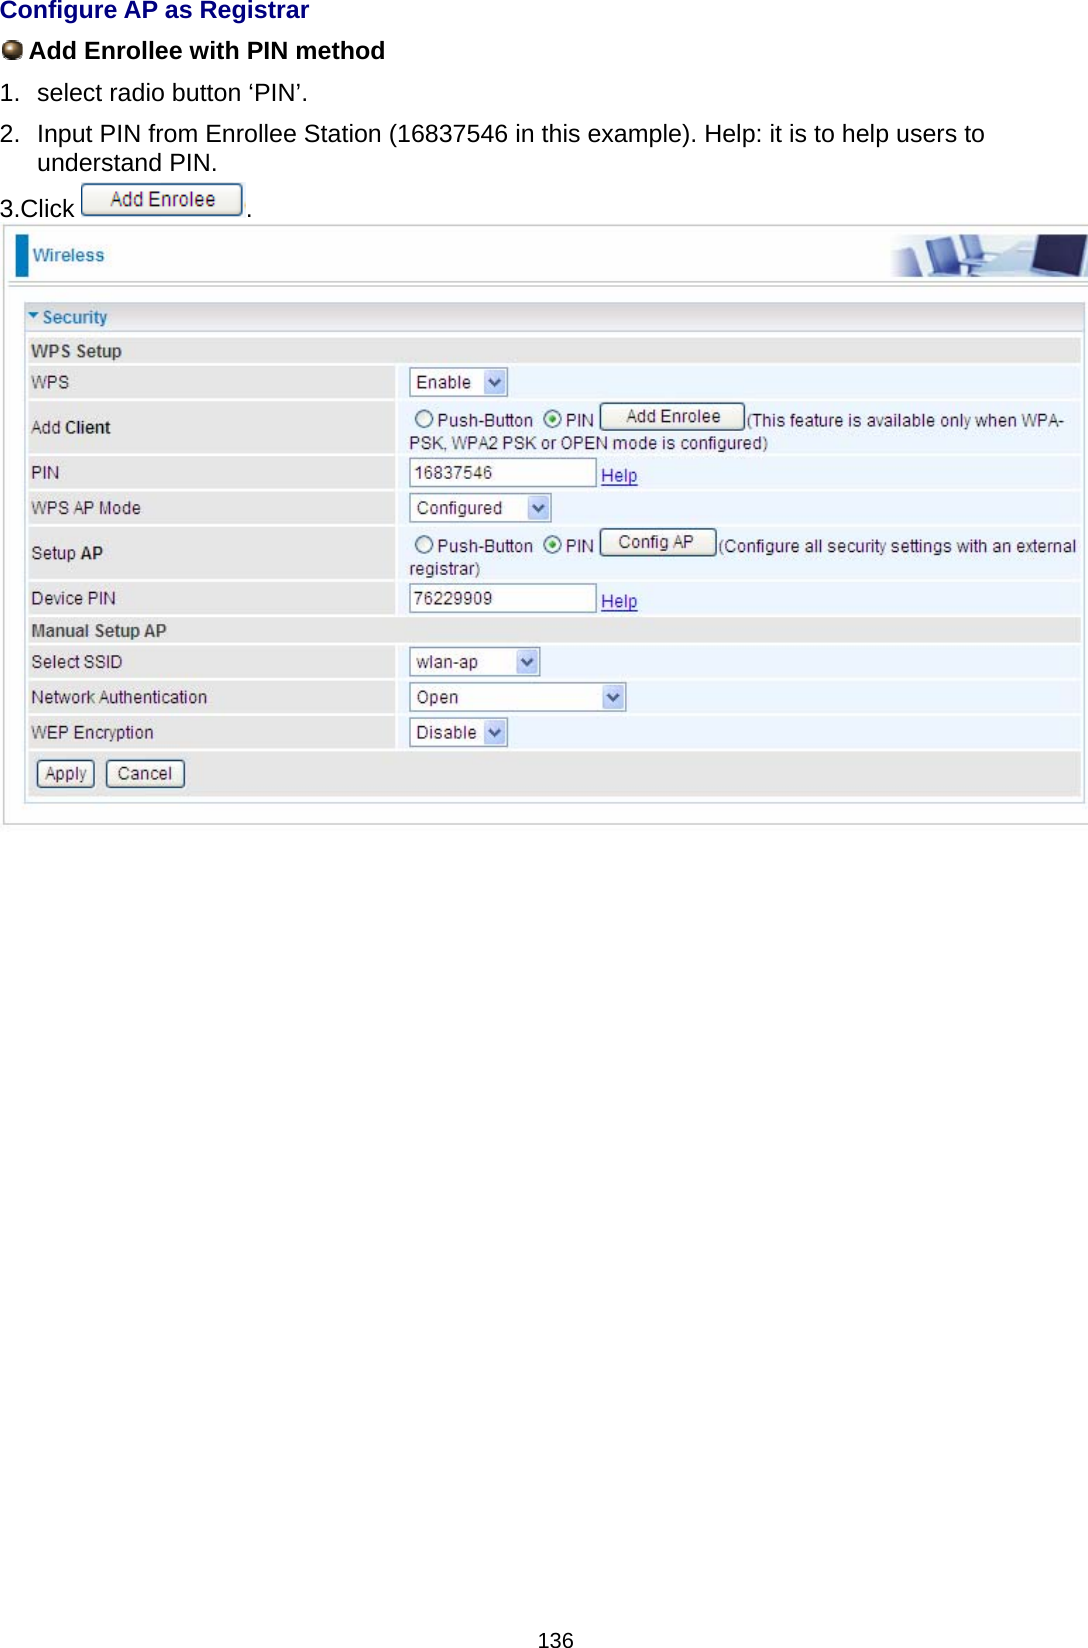  136 Configure AP as Registrar  Add Enrollee with PIN method  1.  select radio button ‘PIN’. 2.  Input PIN from Enrollee Station (16837546 in this example). Help: it is to help users to understand PIN. 3.Click  .                        